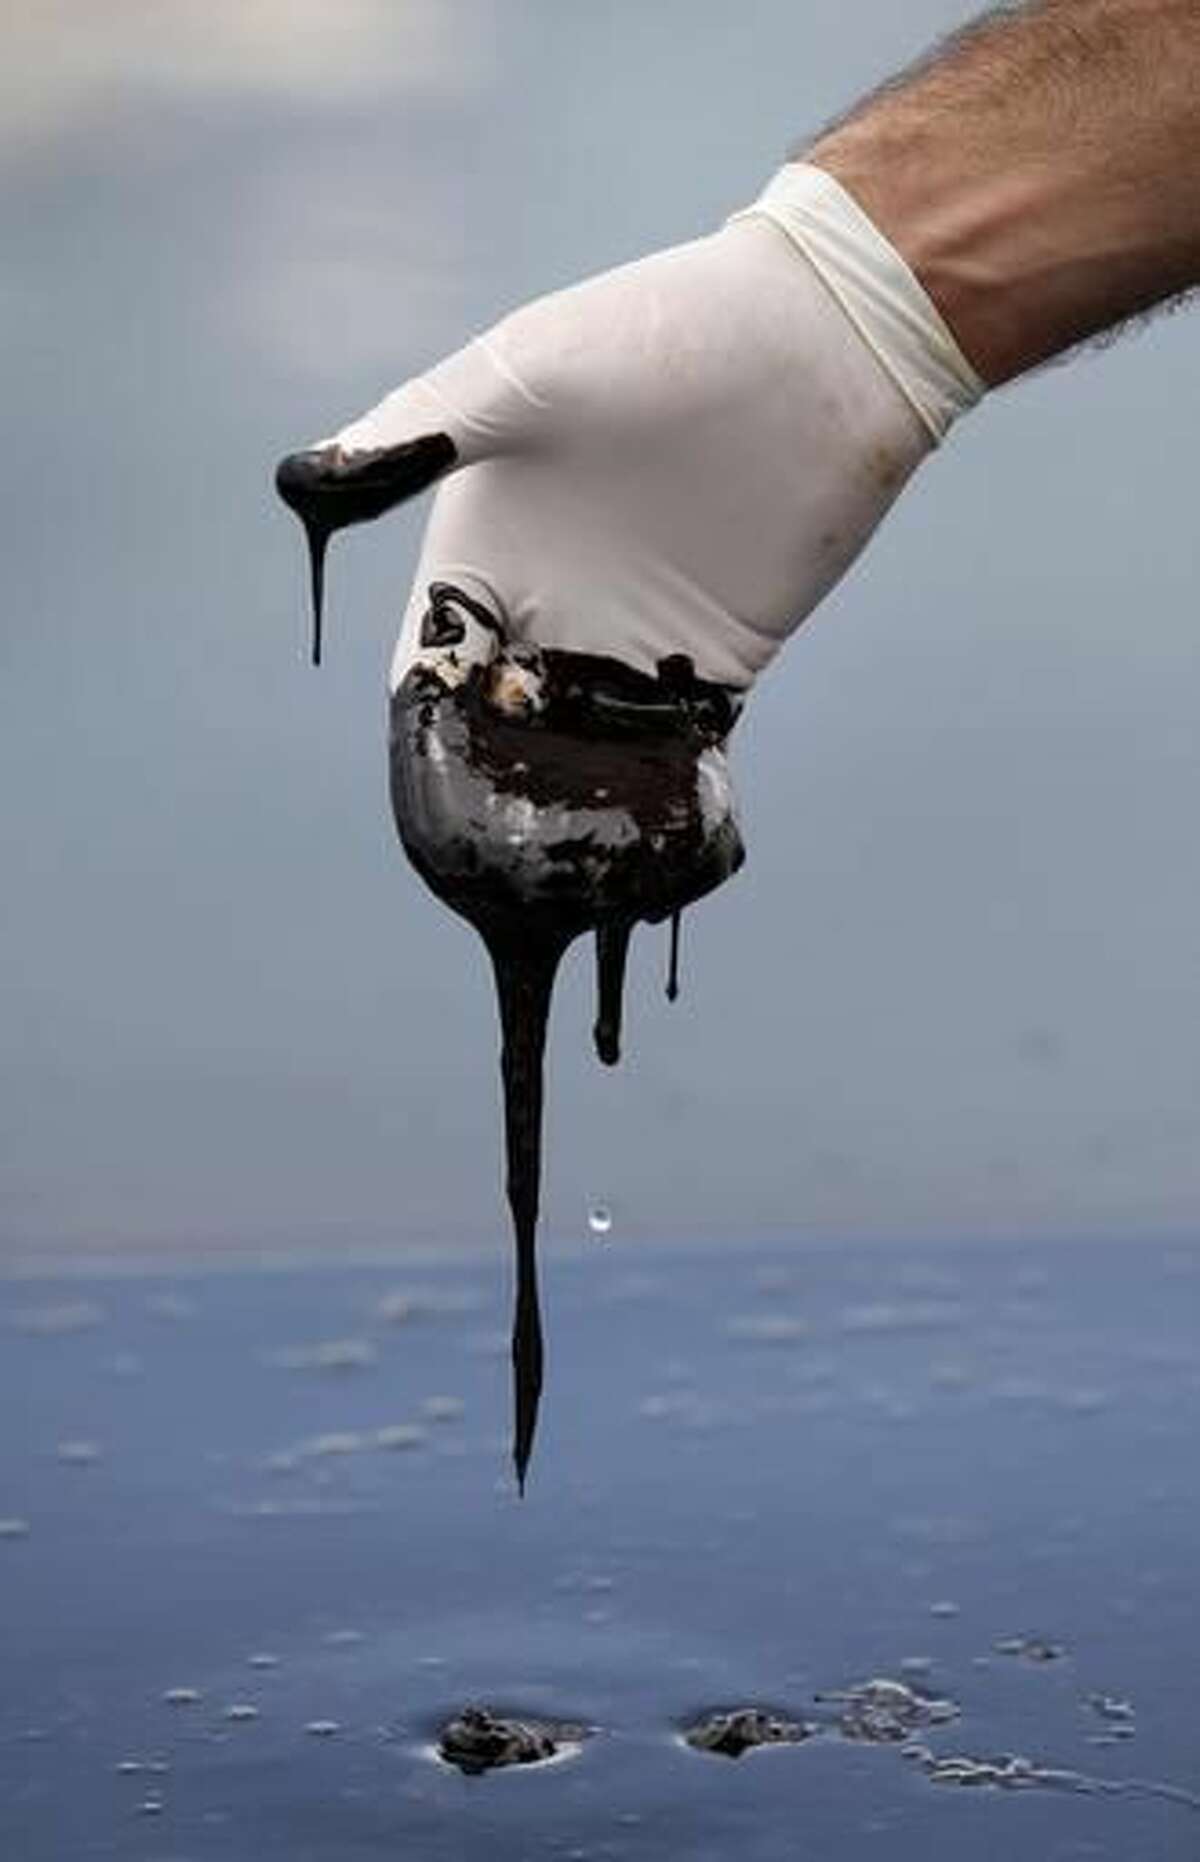 FILE - In this June 15, 2010 file photo, a member of Louisiana Gov. Bobby Jindal's staff reaches into thick oil on the surface of the northern regions of Barataria Bay in Plaquemines Parish, La. Big Oil's legacy in Louisiana _ an industry long blamed for causing land loss in the coast, is now in dispute like never before. What's changed is the person in the governor's mansion: After eight years of Republican rule, a Democrat is in the mansion. (AP Photo/Gerald Herbert, File)